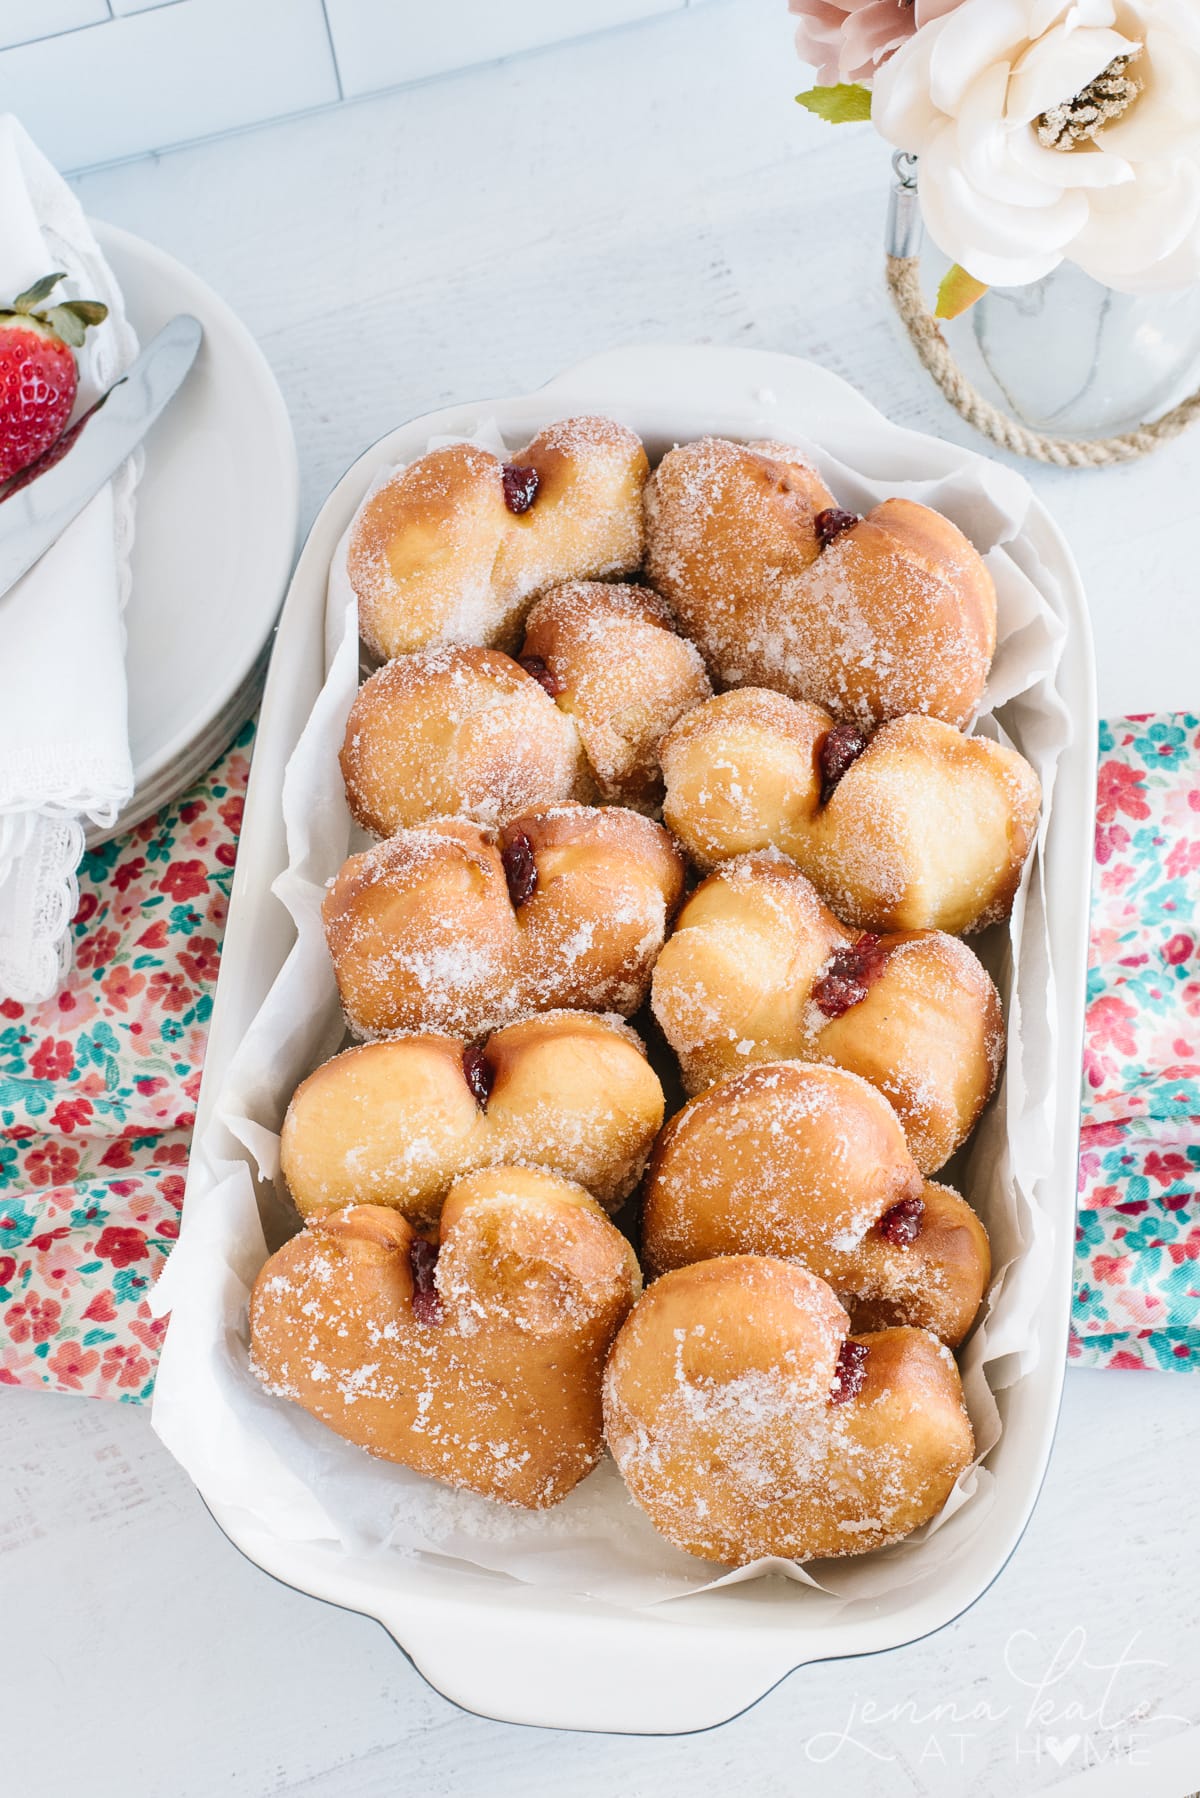 Doughnuts lined up neatly in a baking dish